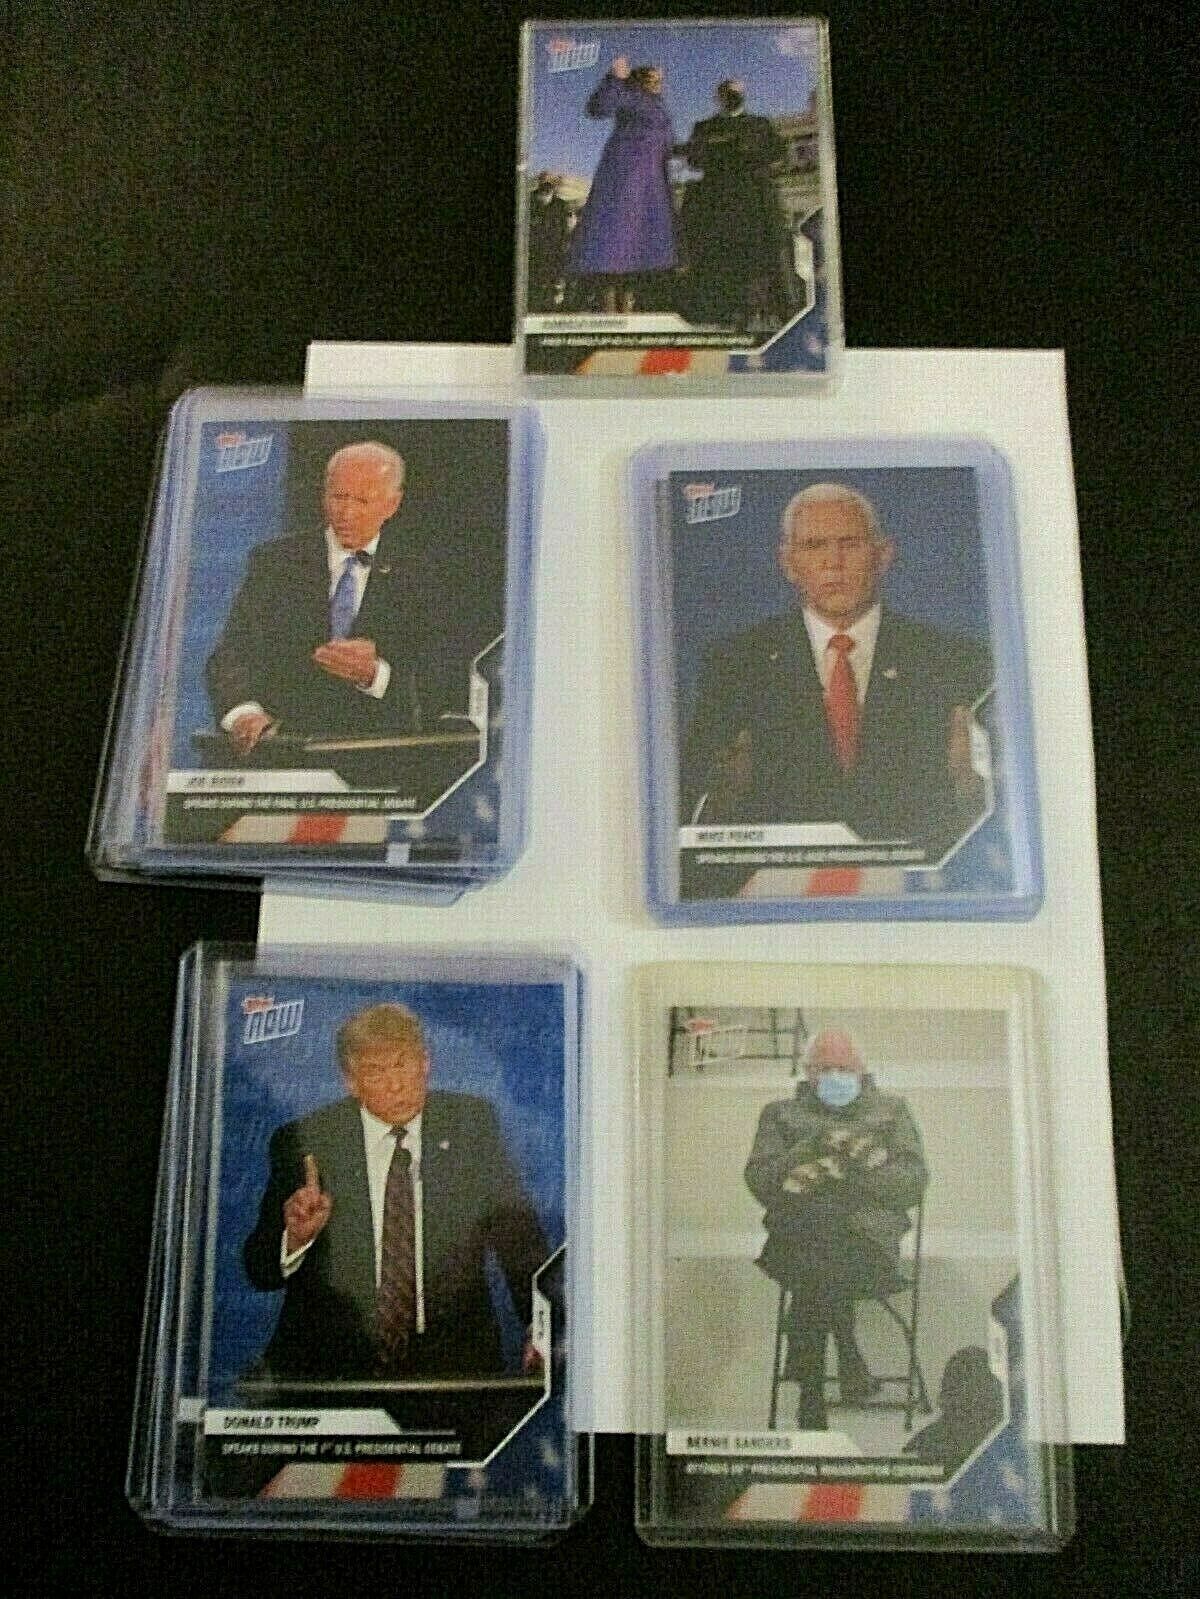 2020 Topps Now Biden/Trump Election Complete set 22 Cards with2 Bernie Sanders